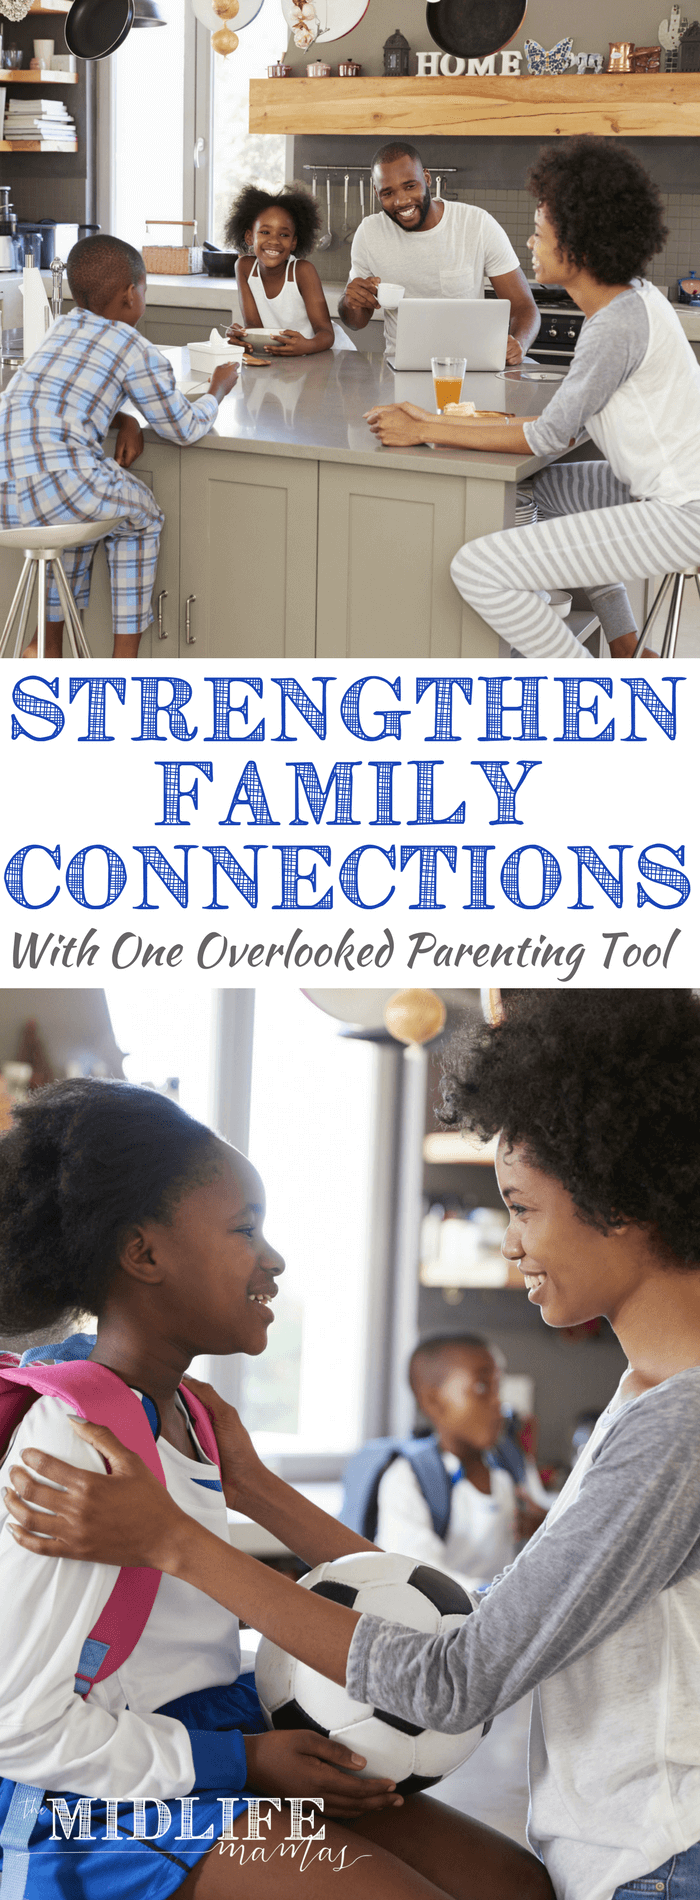 As our children grow up, it gets harder to find ideas and activities to foster strong family connections. But this idea for a family meeting that parents can use to build a strong family connection that lasts and lasts! #familyconnection #familymeeting www.themidlifemamas.com